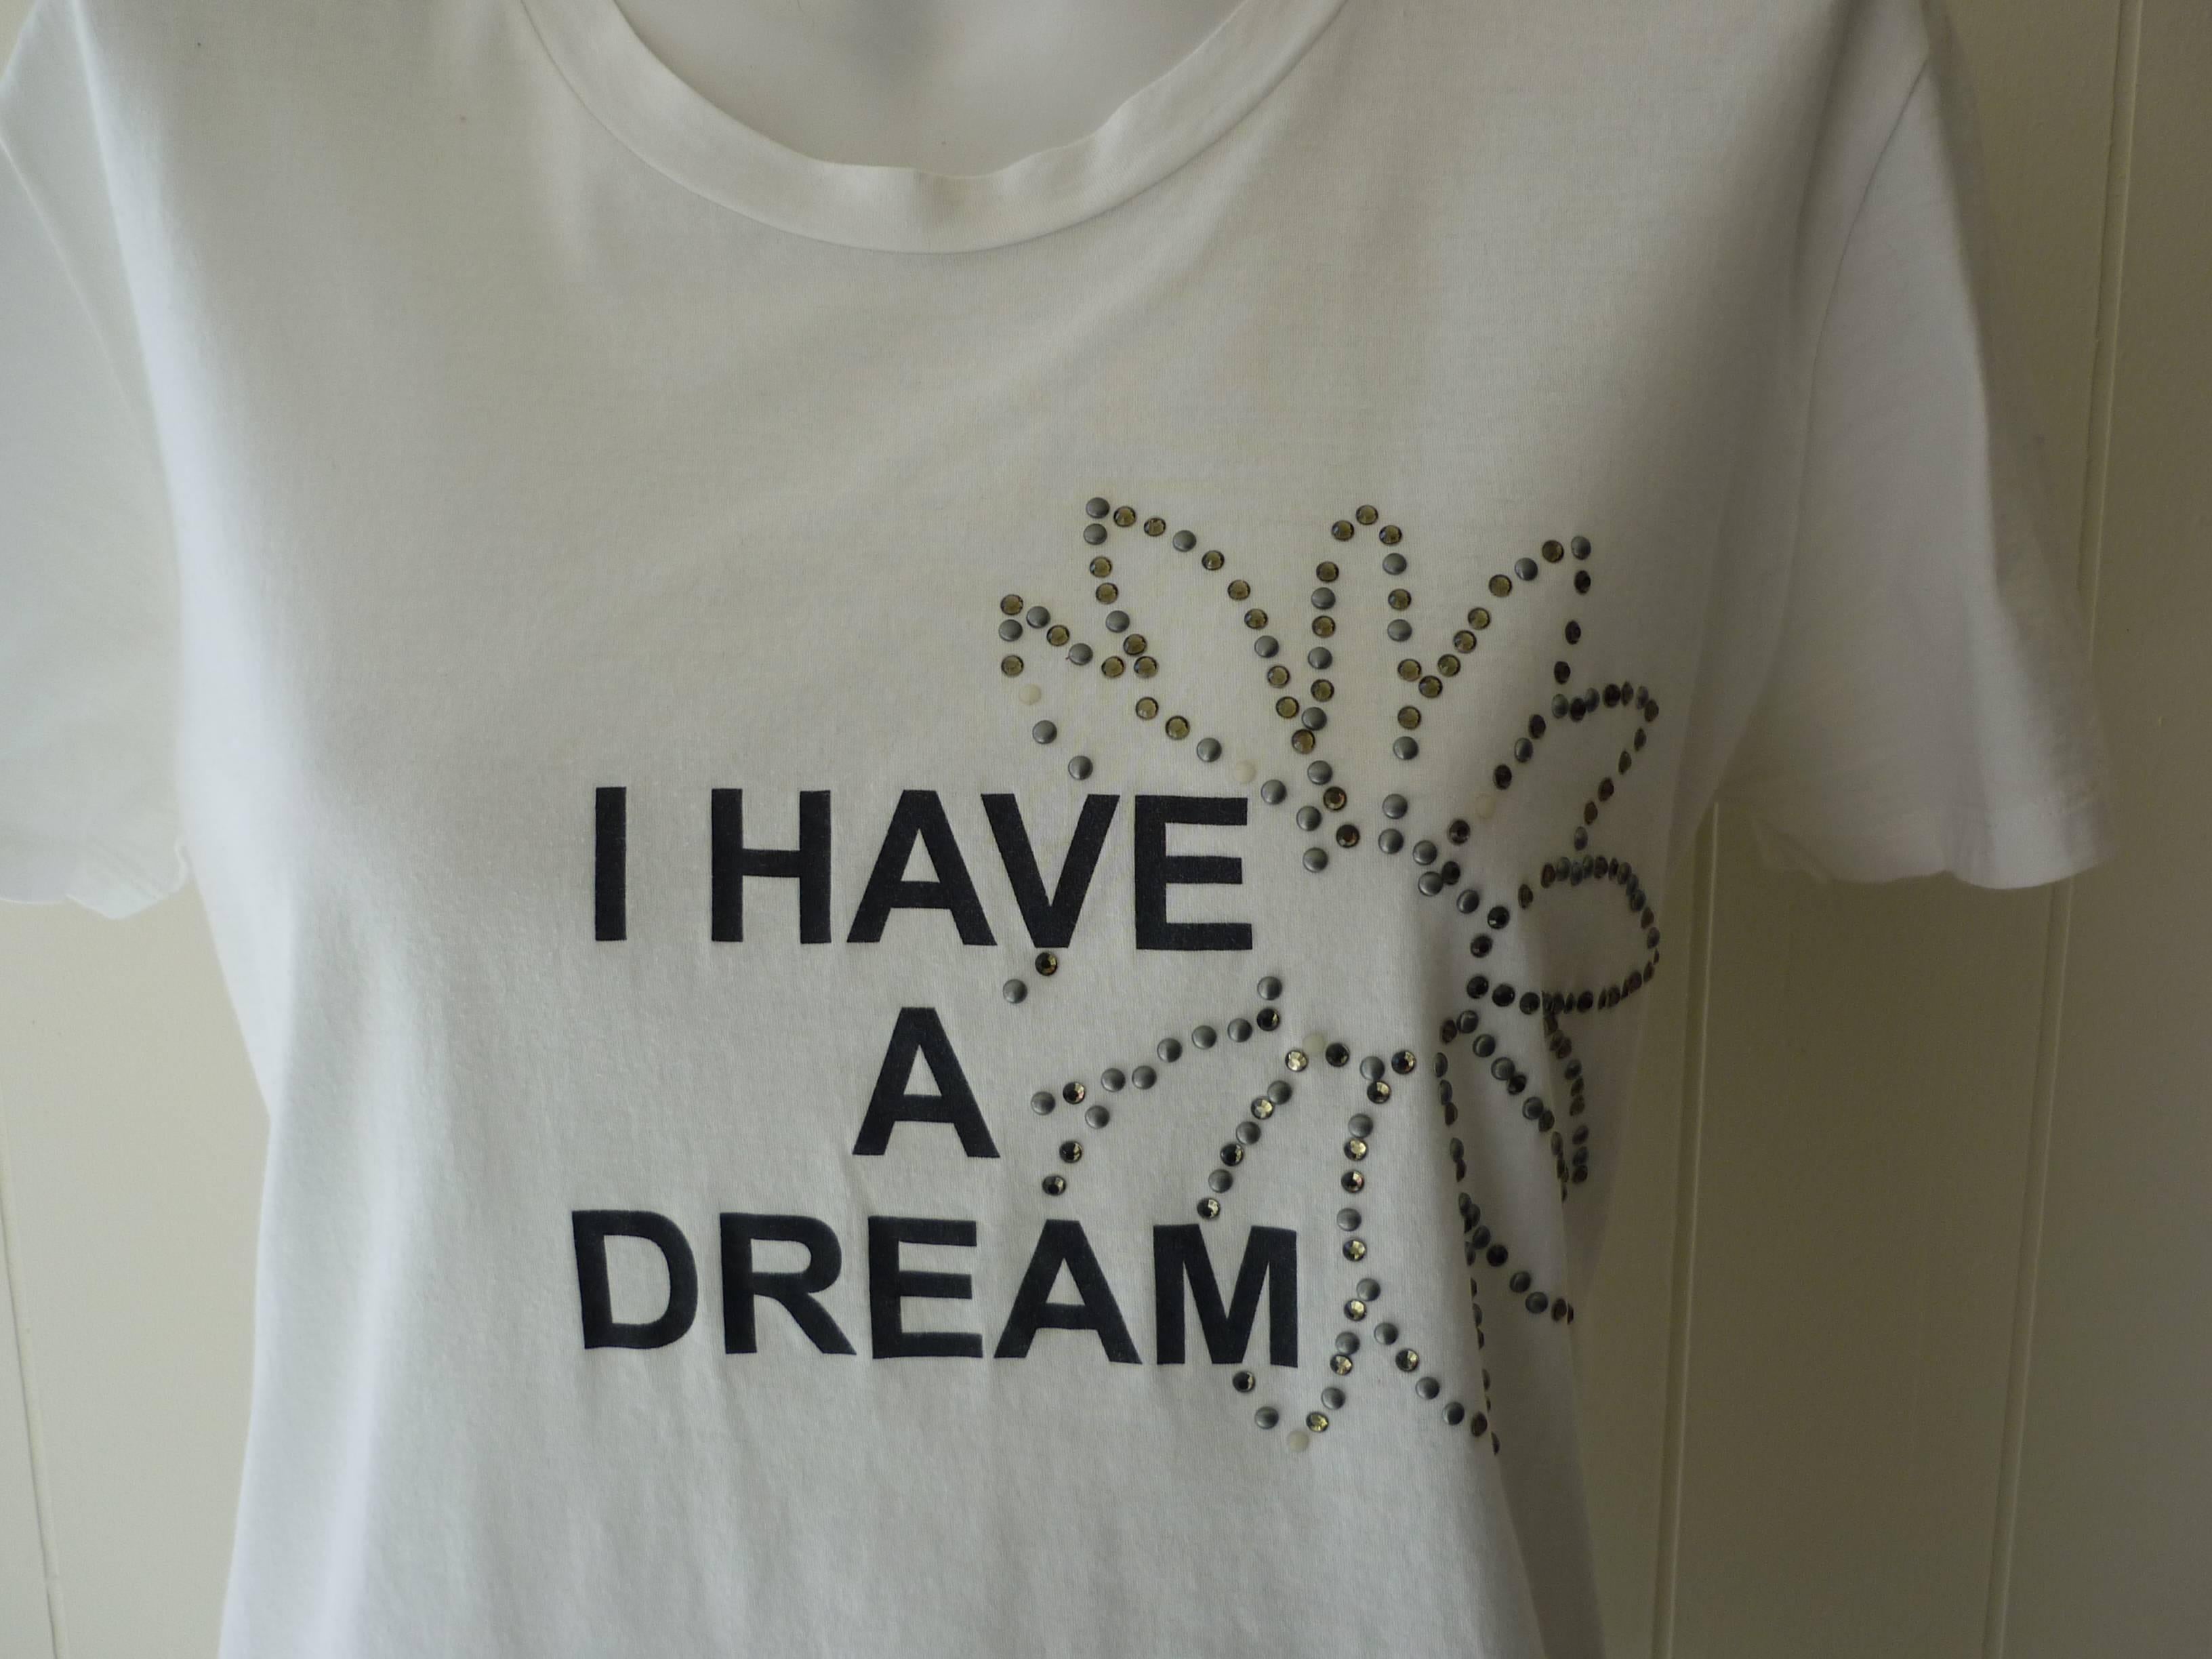 This is one of a series of messages for the S/S 2009 Collection Anniversaire which also promoted Obama and the Democratic Party. The Quote is of course from Martin Luther King.

The t-shirt is made in France of 100% cotton and studded in the form